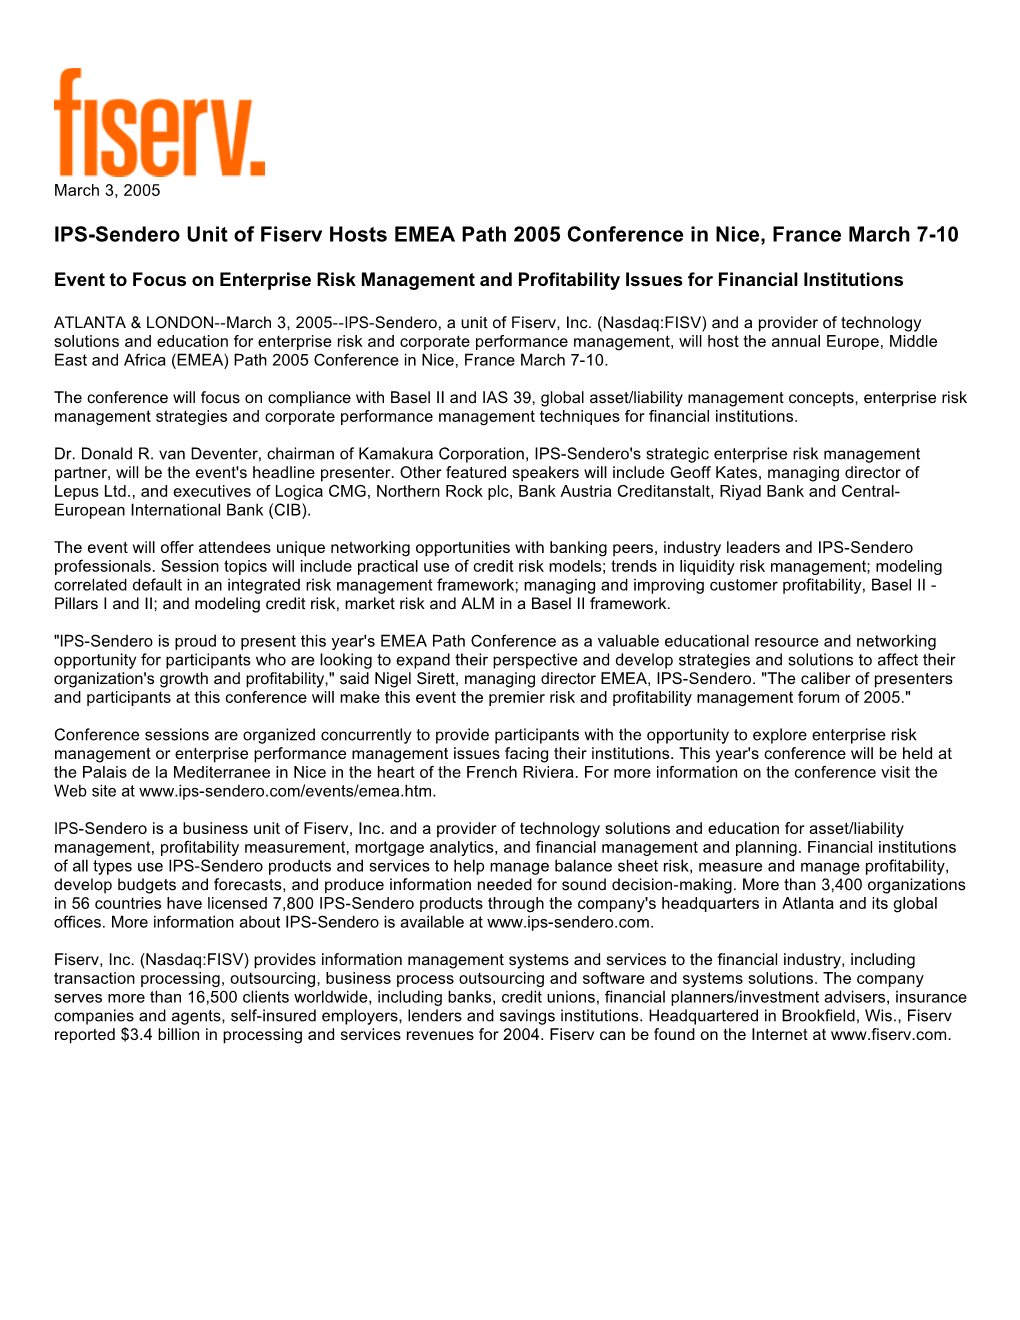 IPS-Sendero Unit of Fiserv Hosts EMEA Path 2005 Conference in Nice, France March 7-10